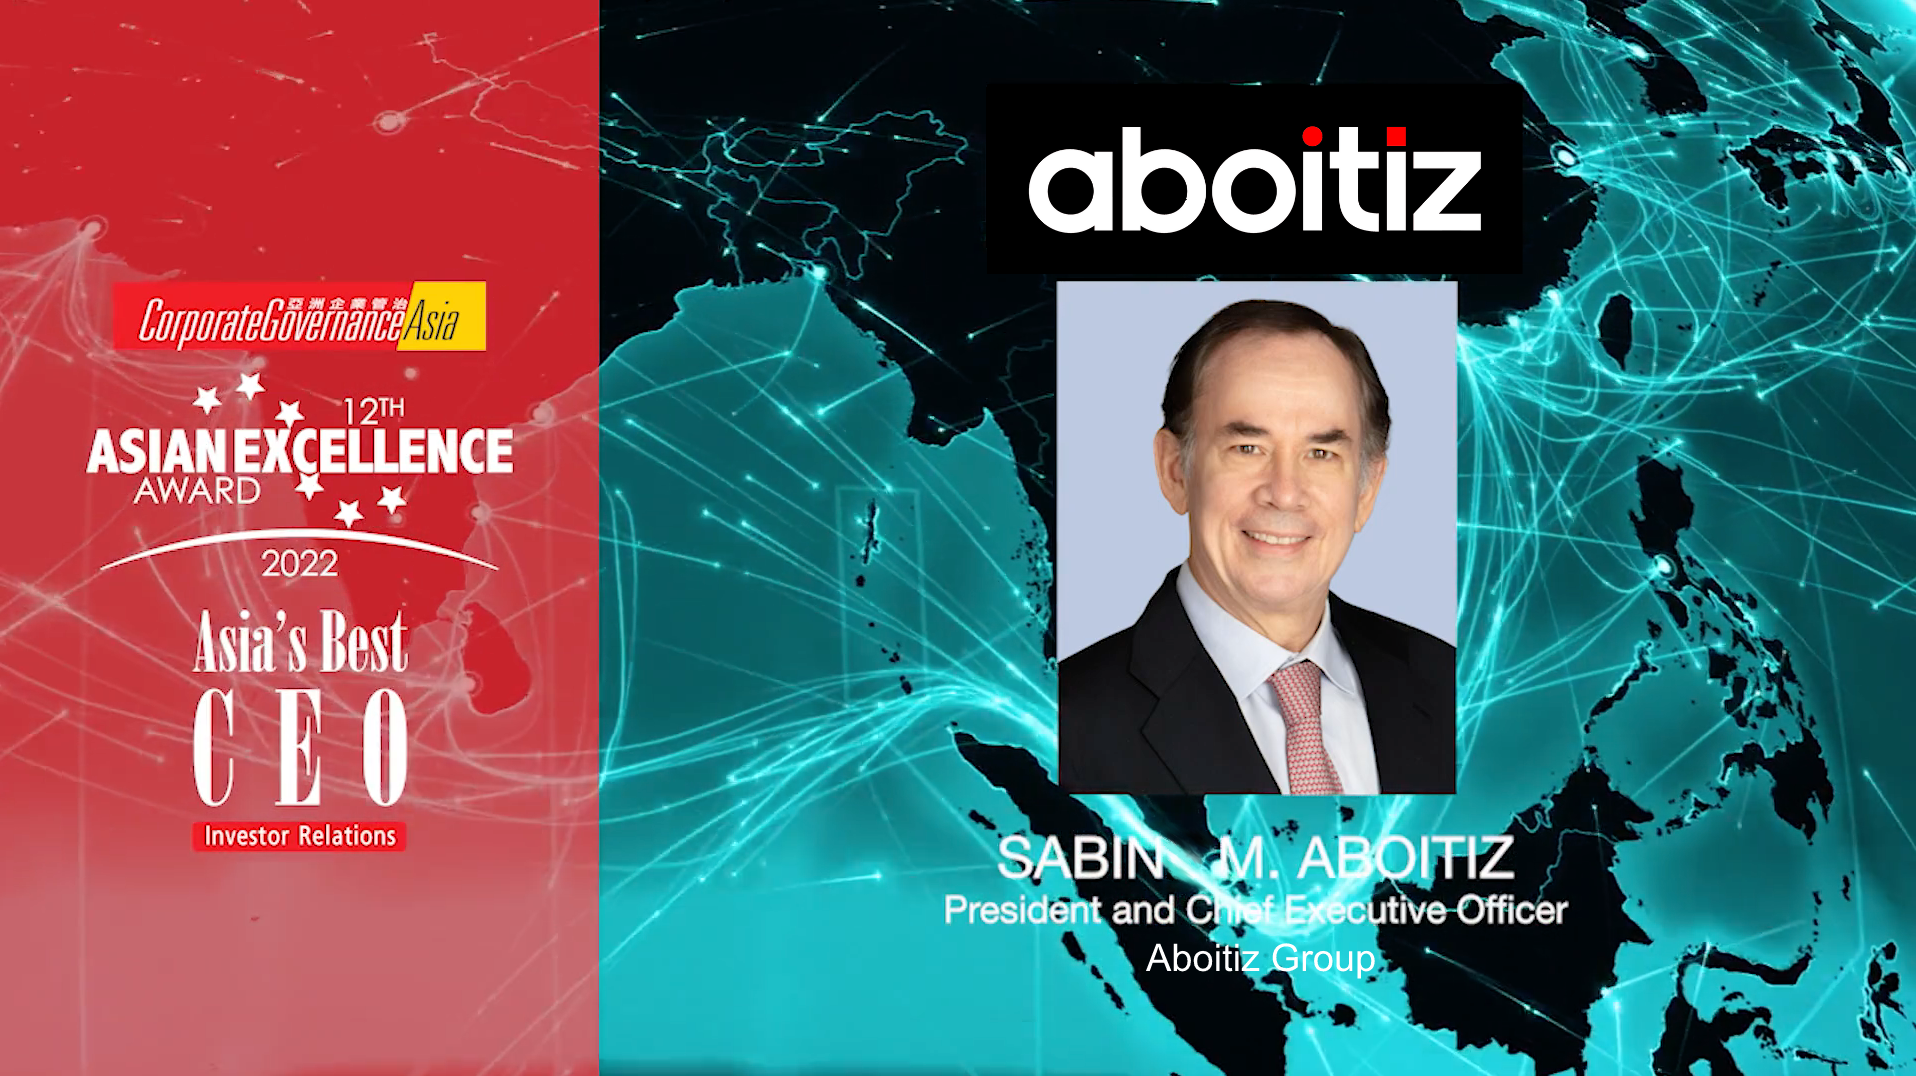 Aboitiz Group recognized by Corporate Governance Asia for Reigniting Asia, Asia’s Best CEO